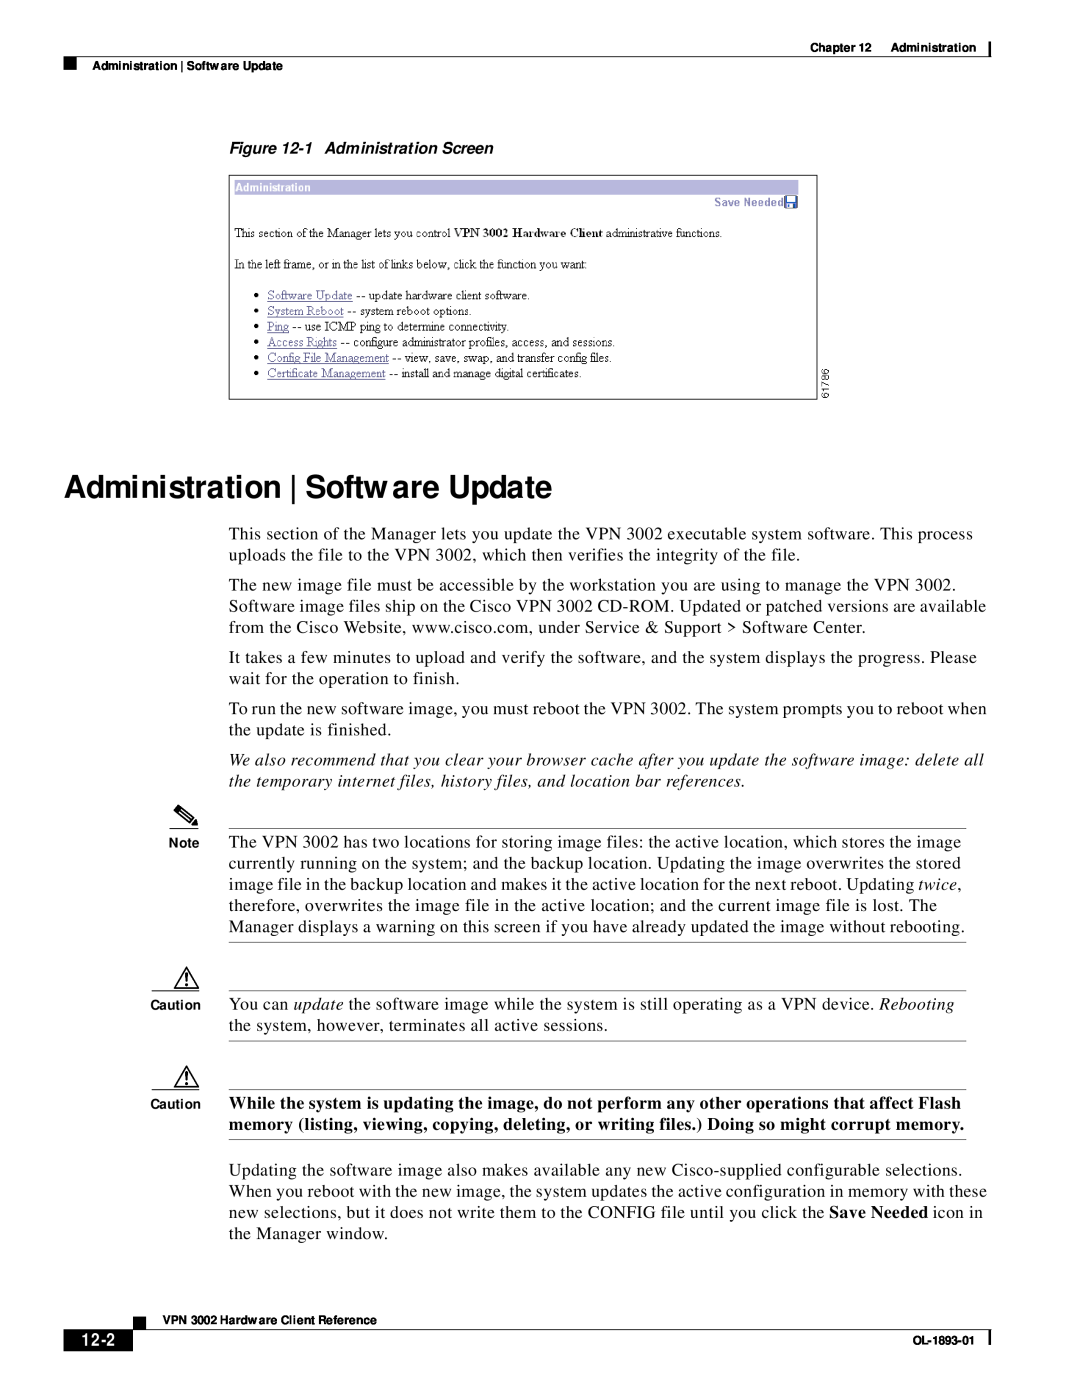 Cisco Systems VPN 3002 manual Administration | Software Update, 12-2, 1Administration Screen 